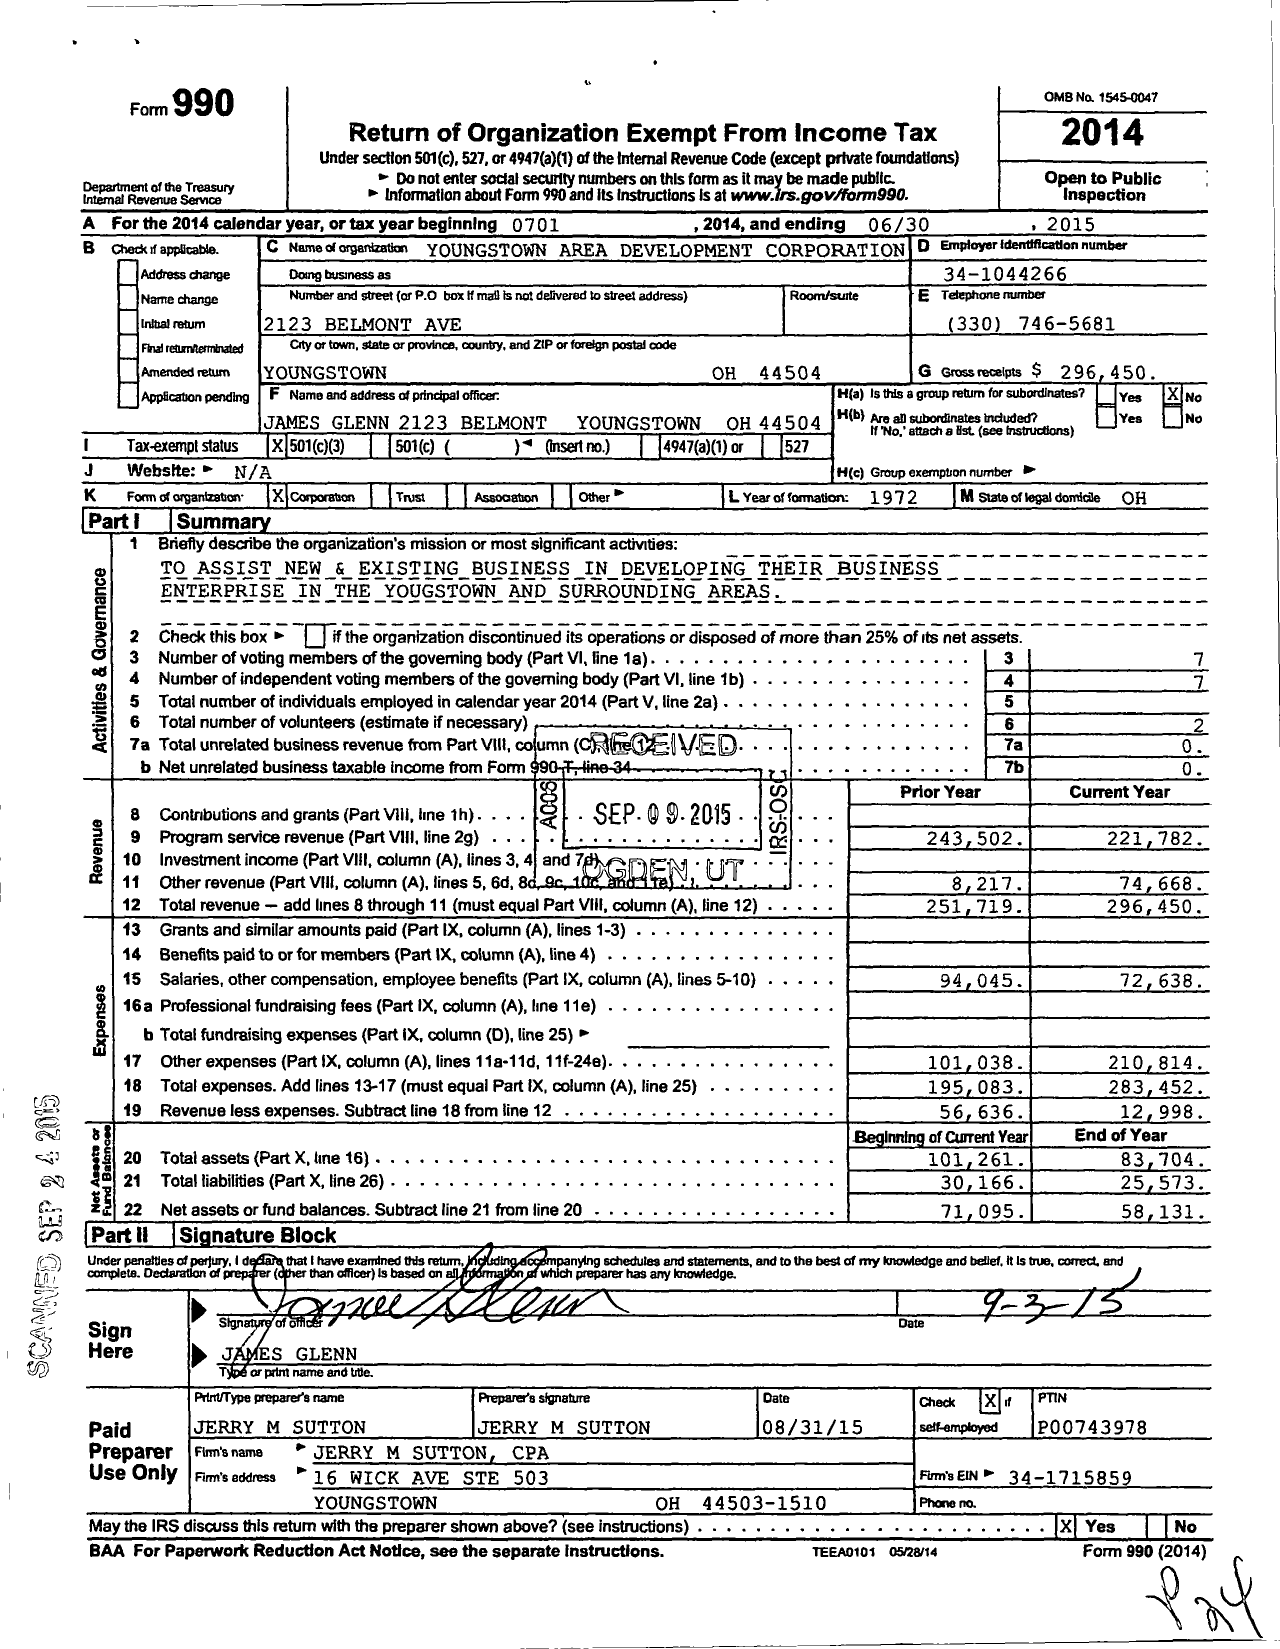 Image of first page of 2014 Form 990 for Youngstown Area Development Corporation